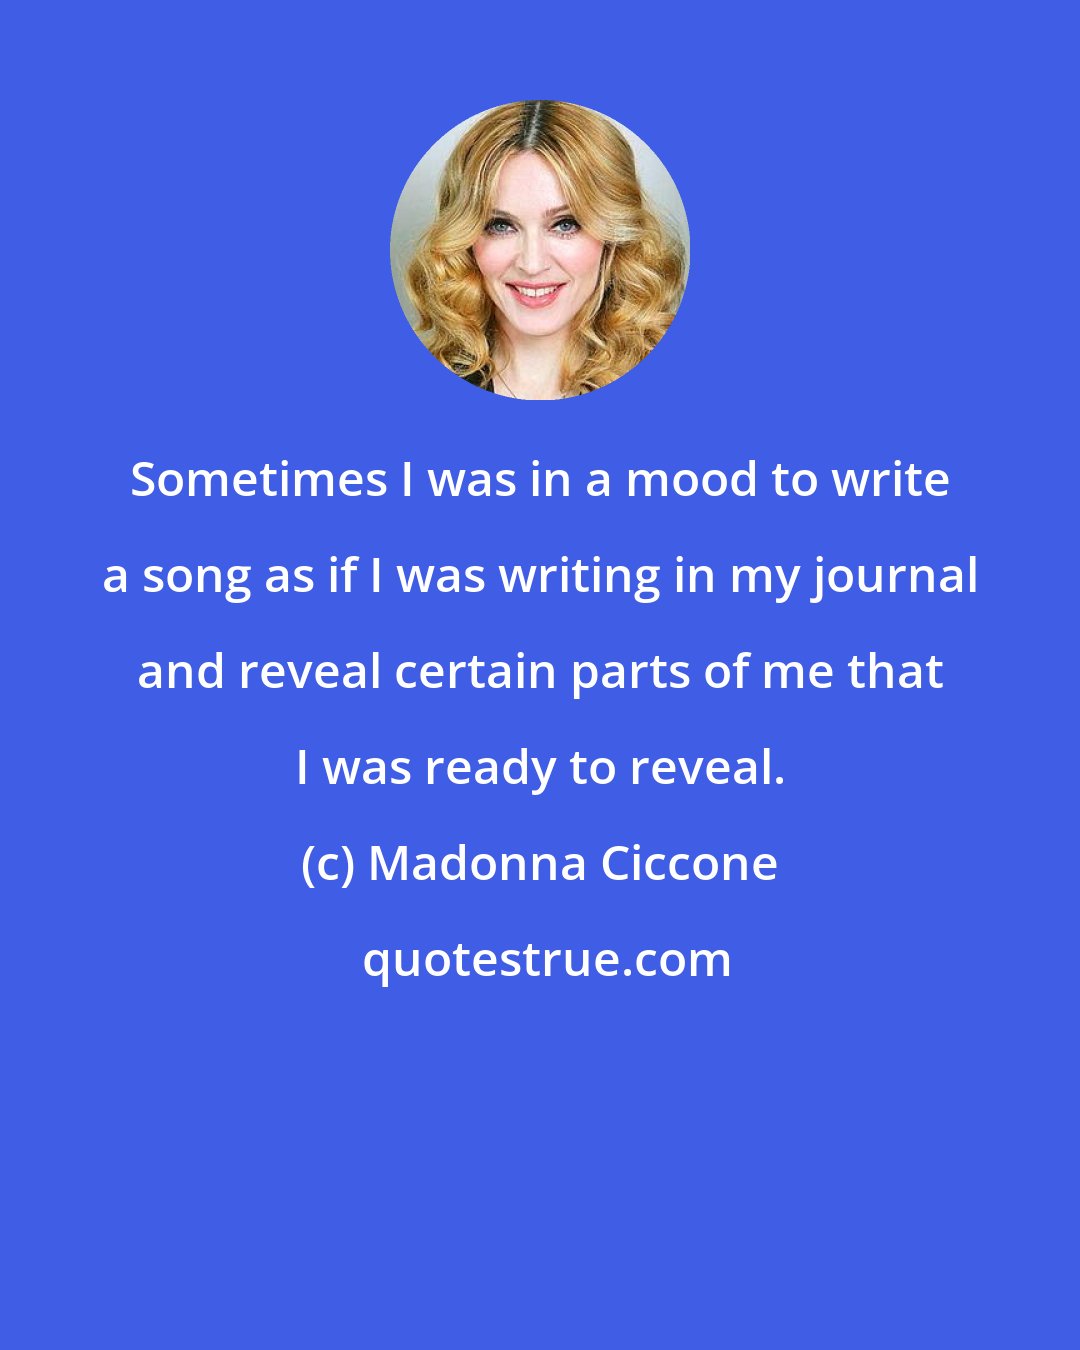 Madonna Ciccone: Sometimes I was in a mood to write a song as if I was writing in my journal and reveal certain parts of me that I was ready to reveal.